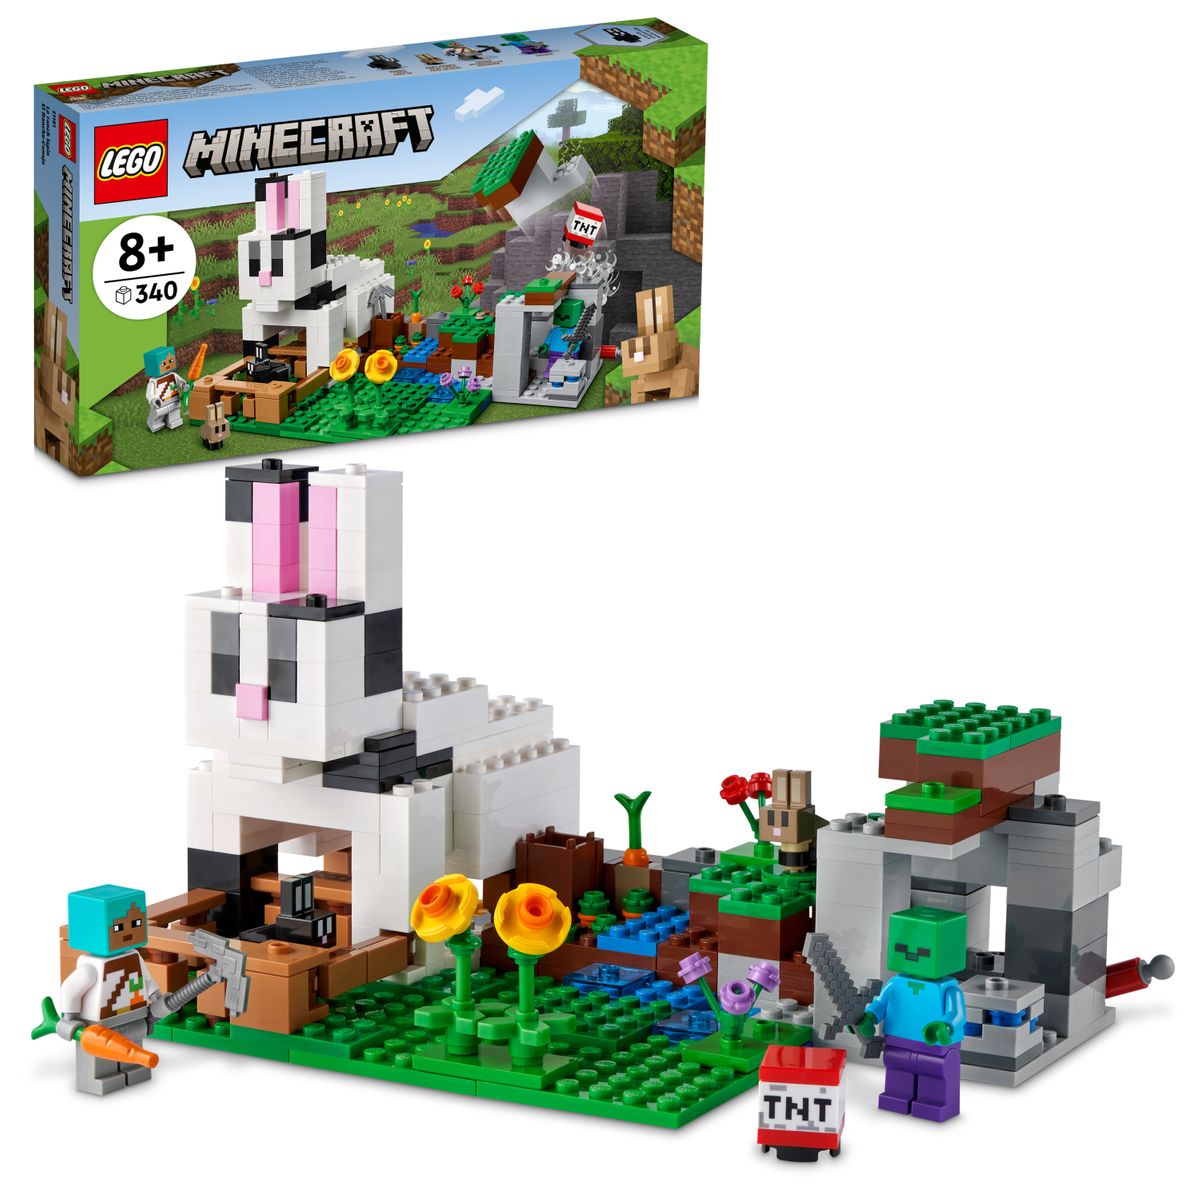 [RDY] [送料無料] LEGO Minecraft The Rabbit Ranch 21181 Building Kit; Toy Bunny House Playset; Gift for Kids and Players Aged 8+ 340 Pieces [楽天海外通販] | LEGO Minecraft The Rabbit Ranch 21181 Building Kit; Toy Bunny House Playset; Gift for Ki